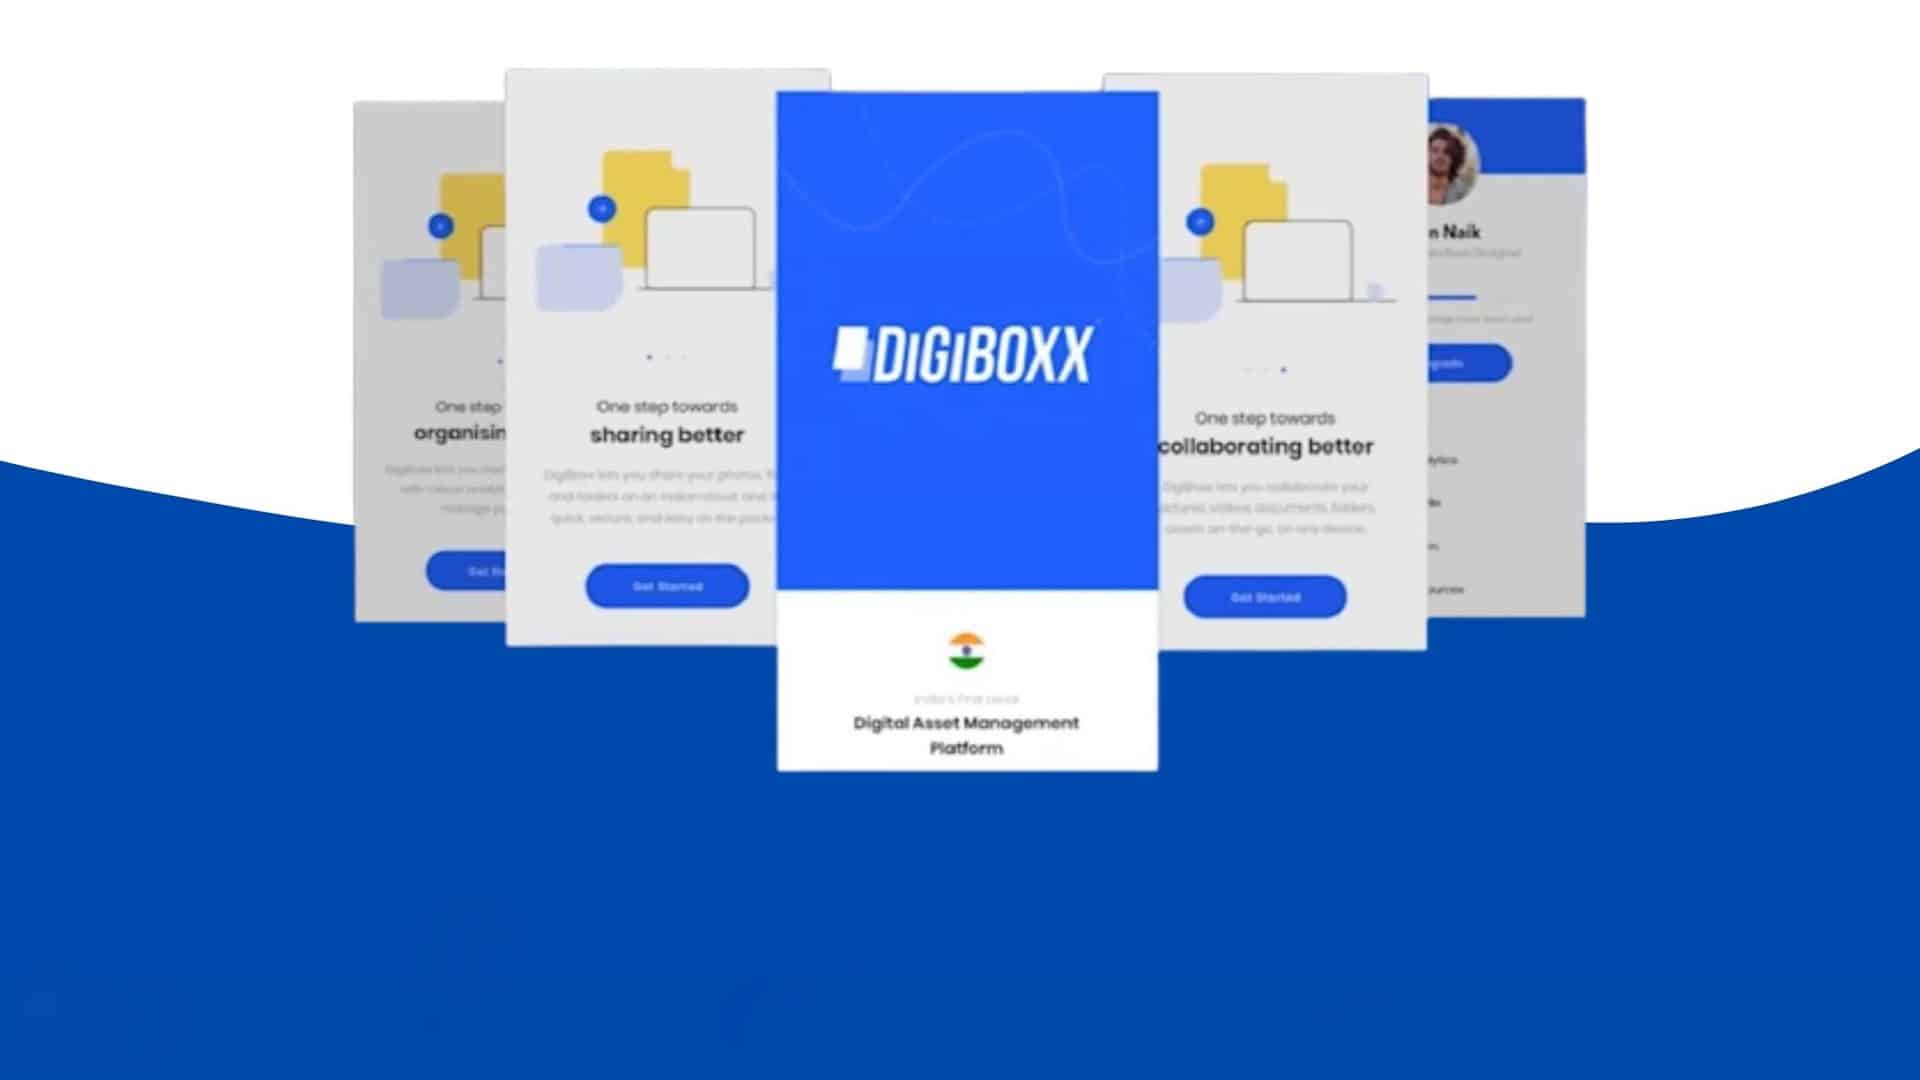 DigiBoxx is the ideal Made-in-India, Save-in-India alternative for government employees